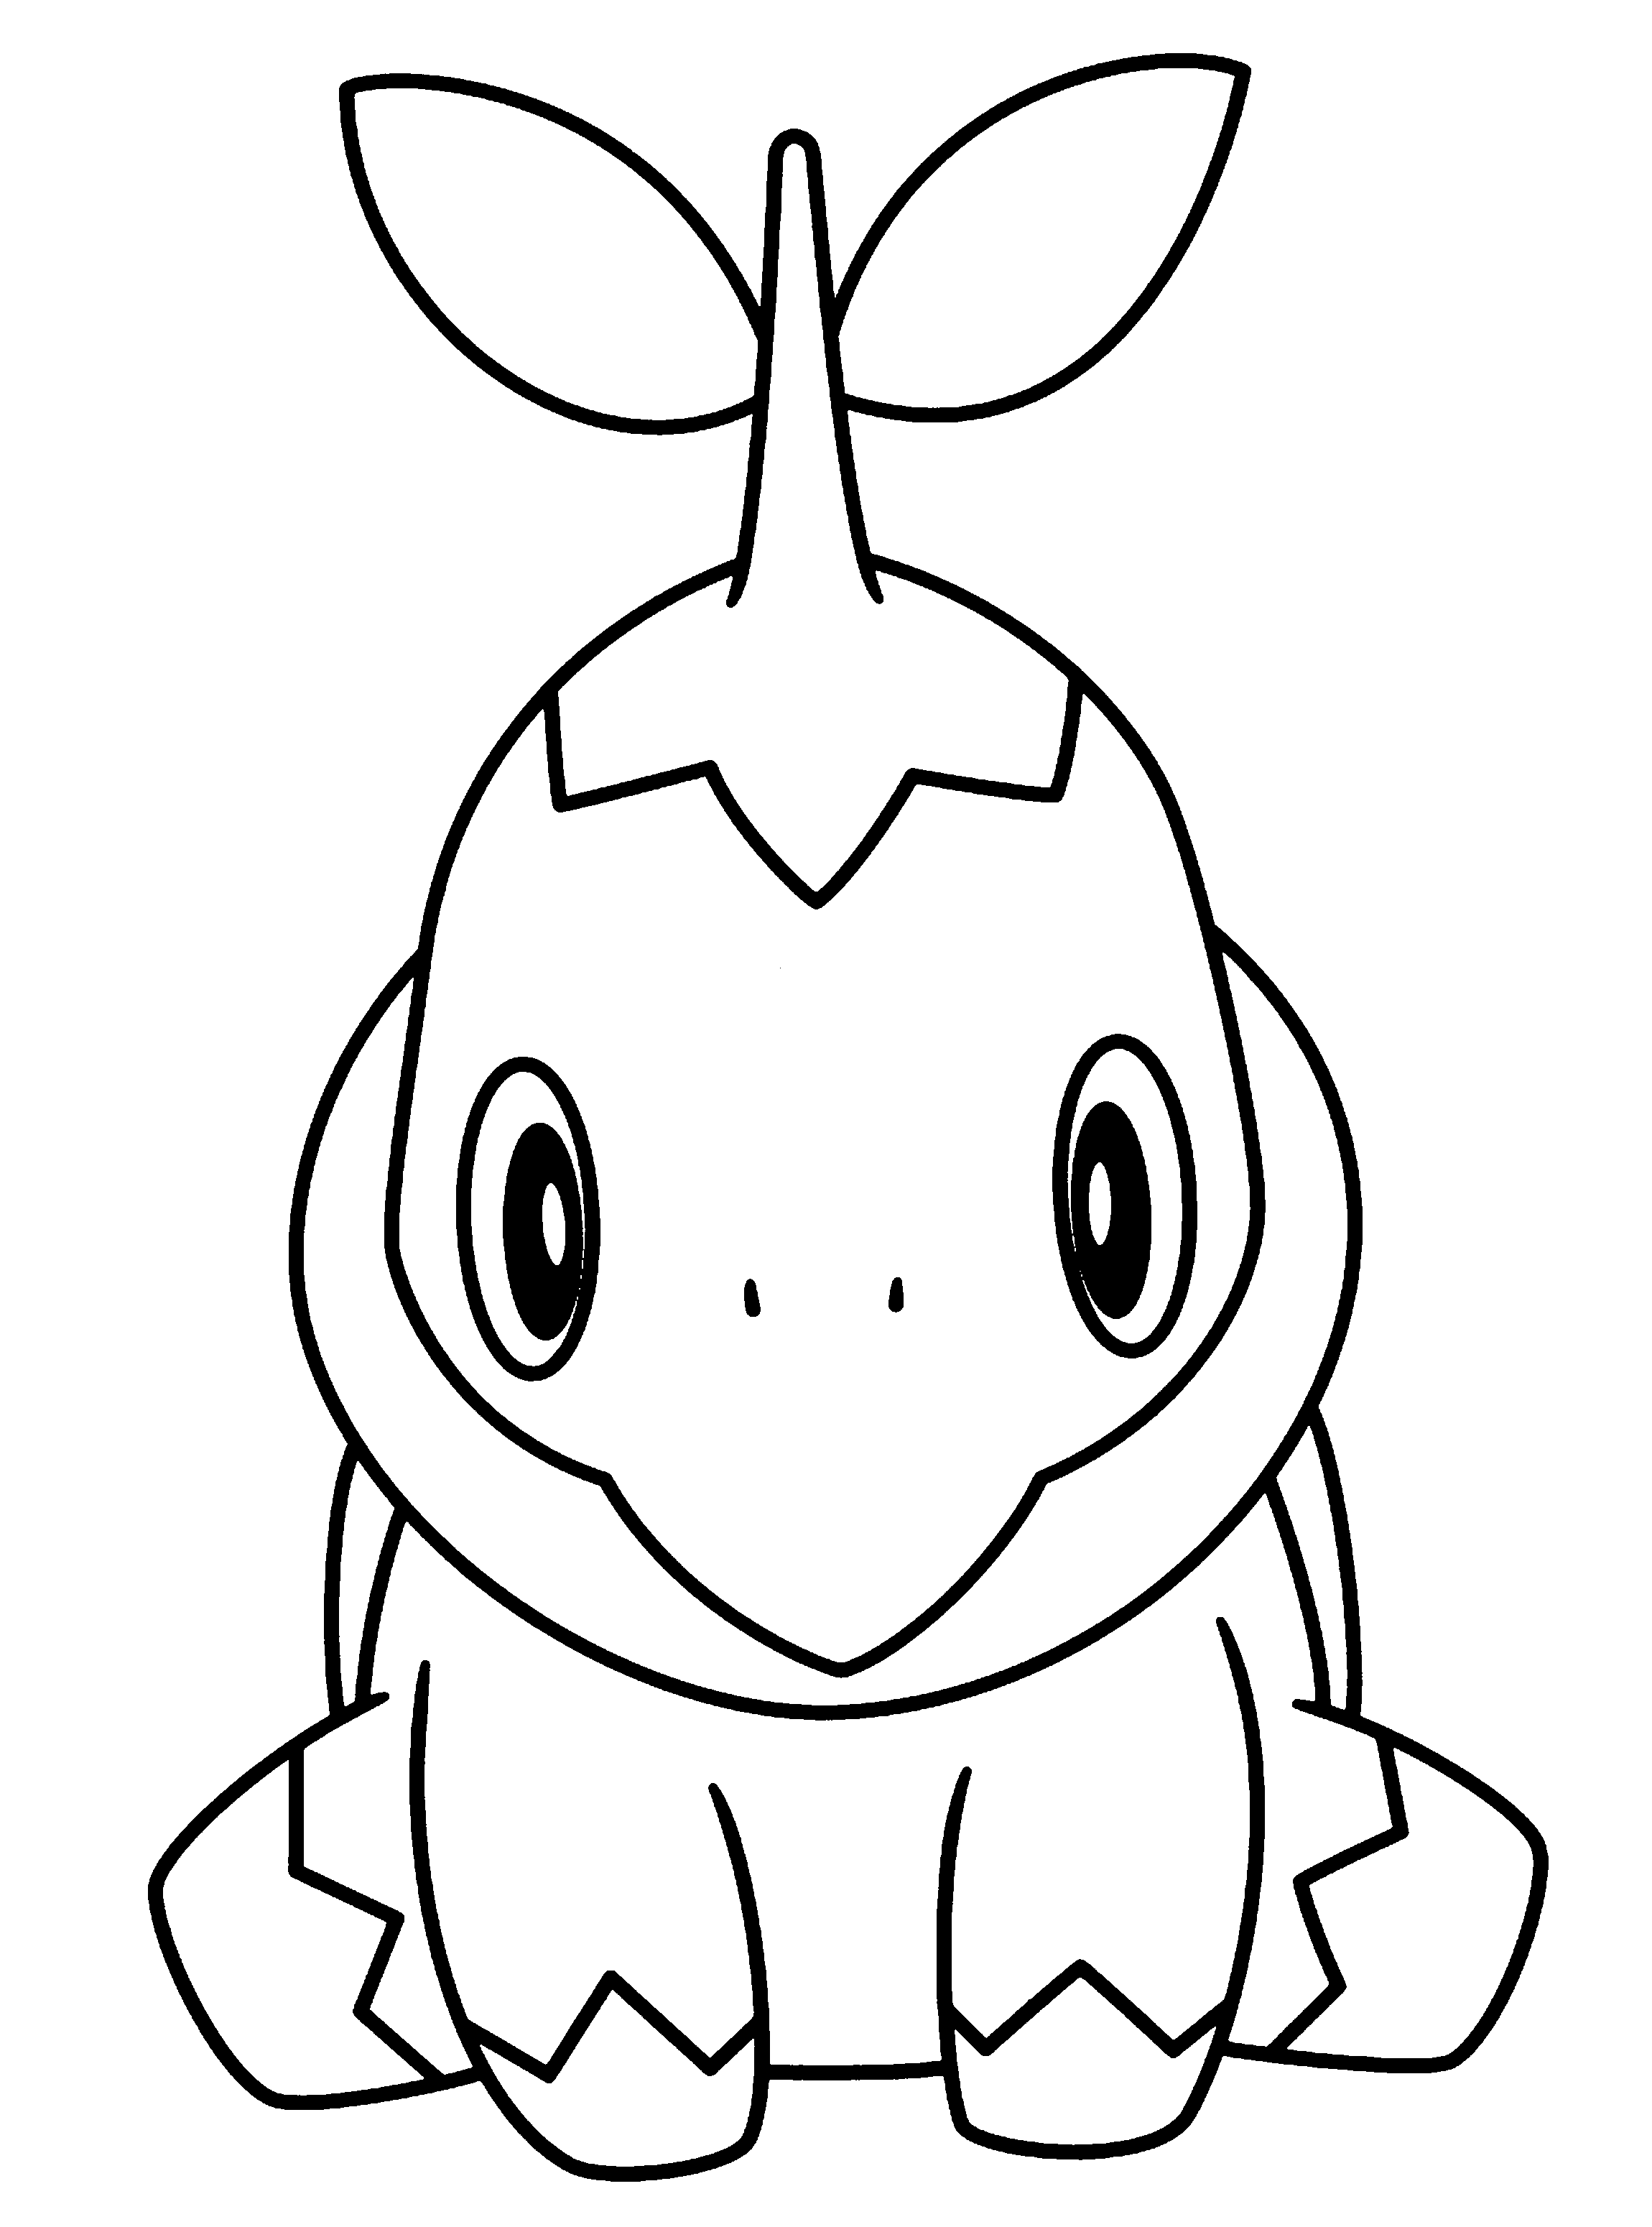 Pokemon Turtwig Coloring Page - Coloring Home